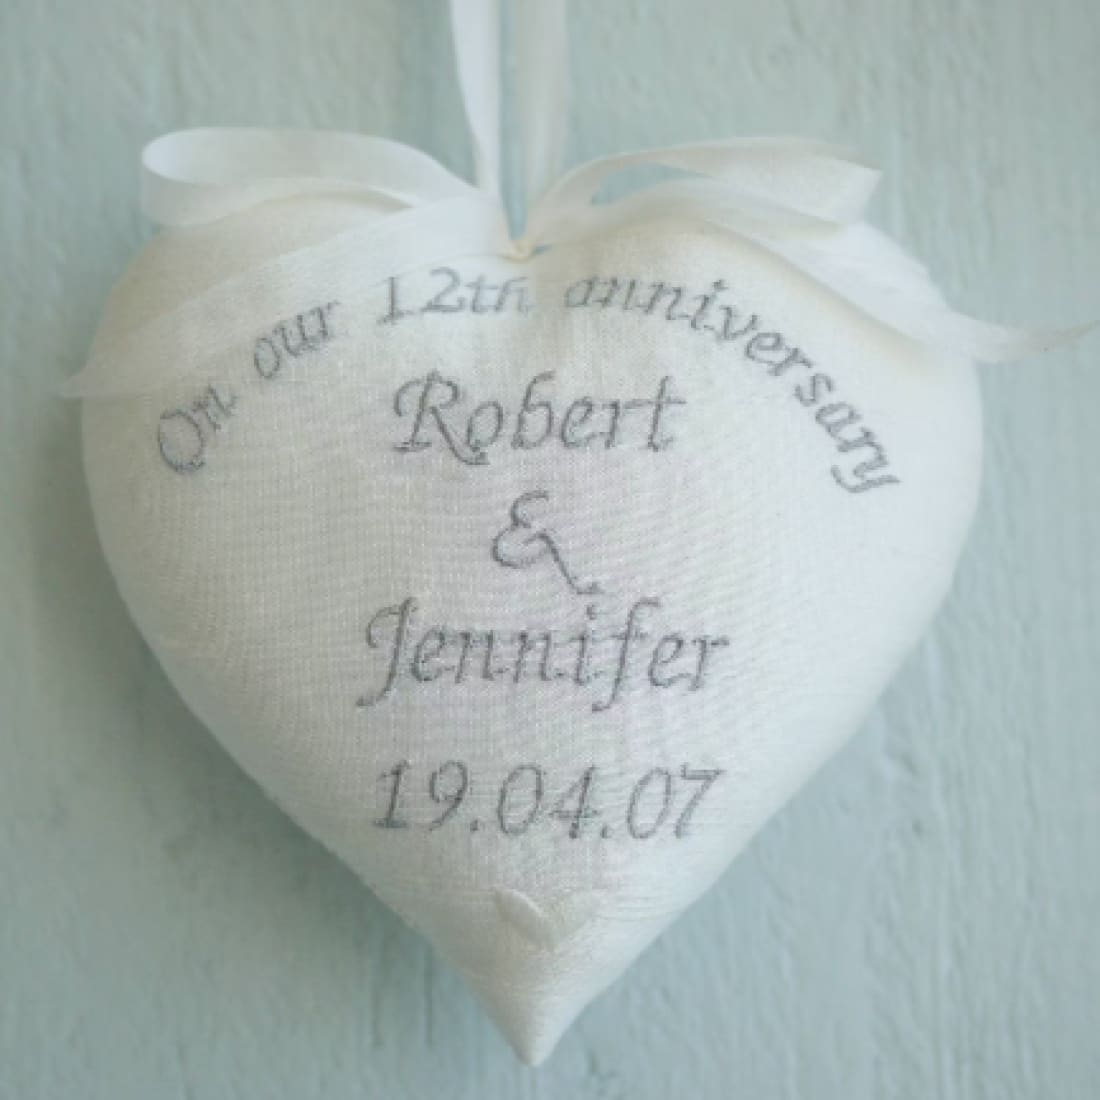 12th Anniversary Gift Heart with Porcelain Coaster 12th Silk Anniversary Gifts